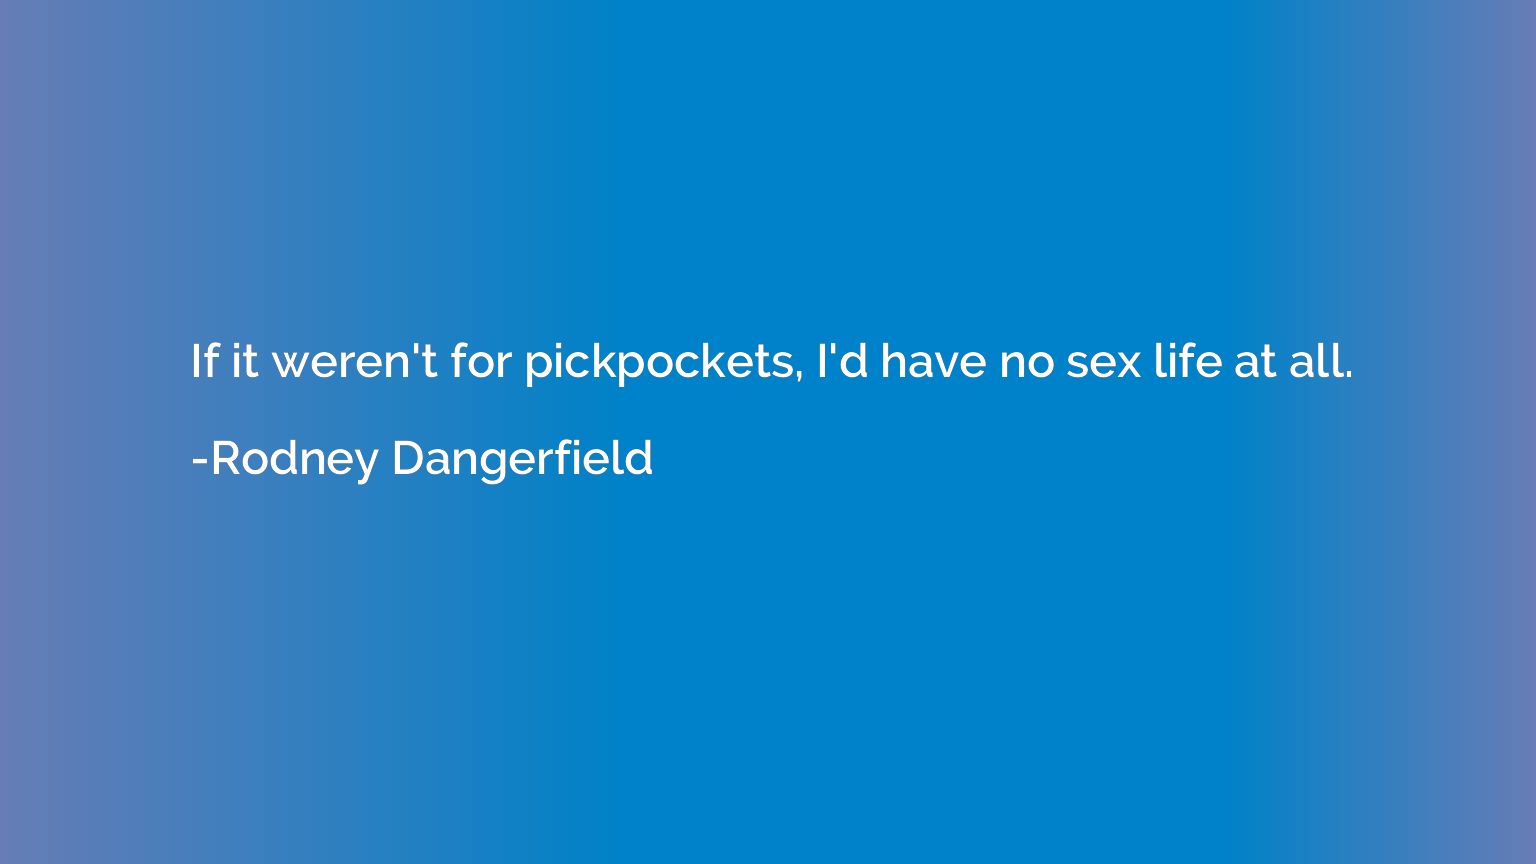 If it weren't for pickpockets, I'd have no sex life at all.